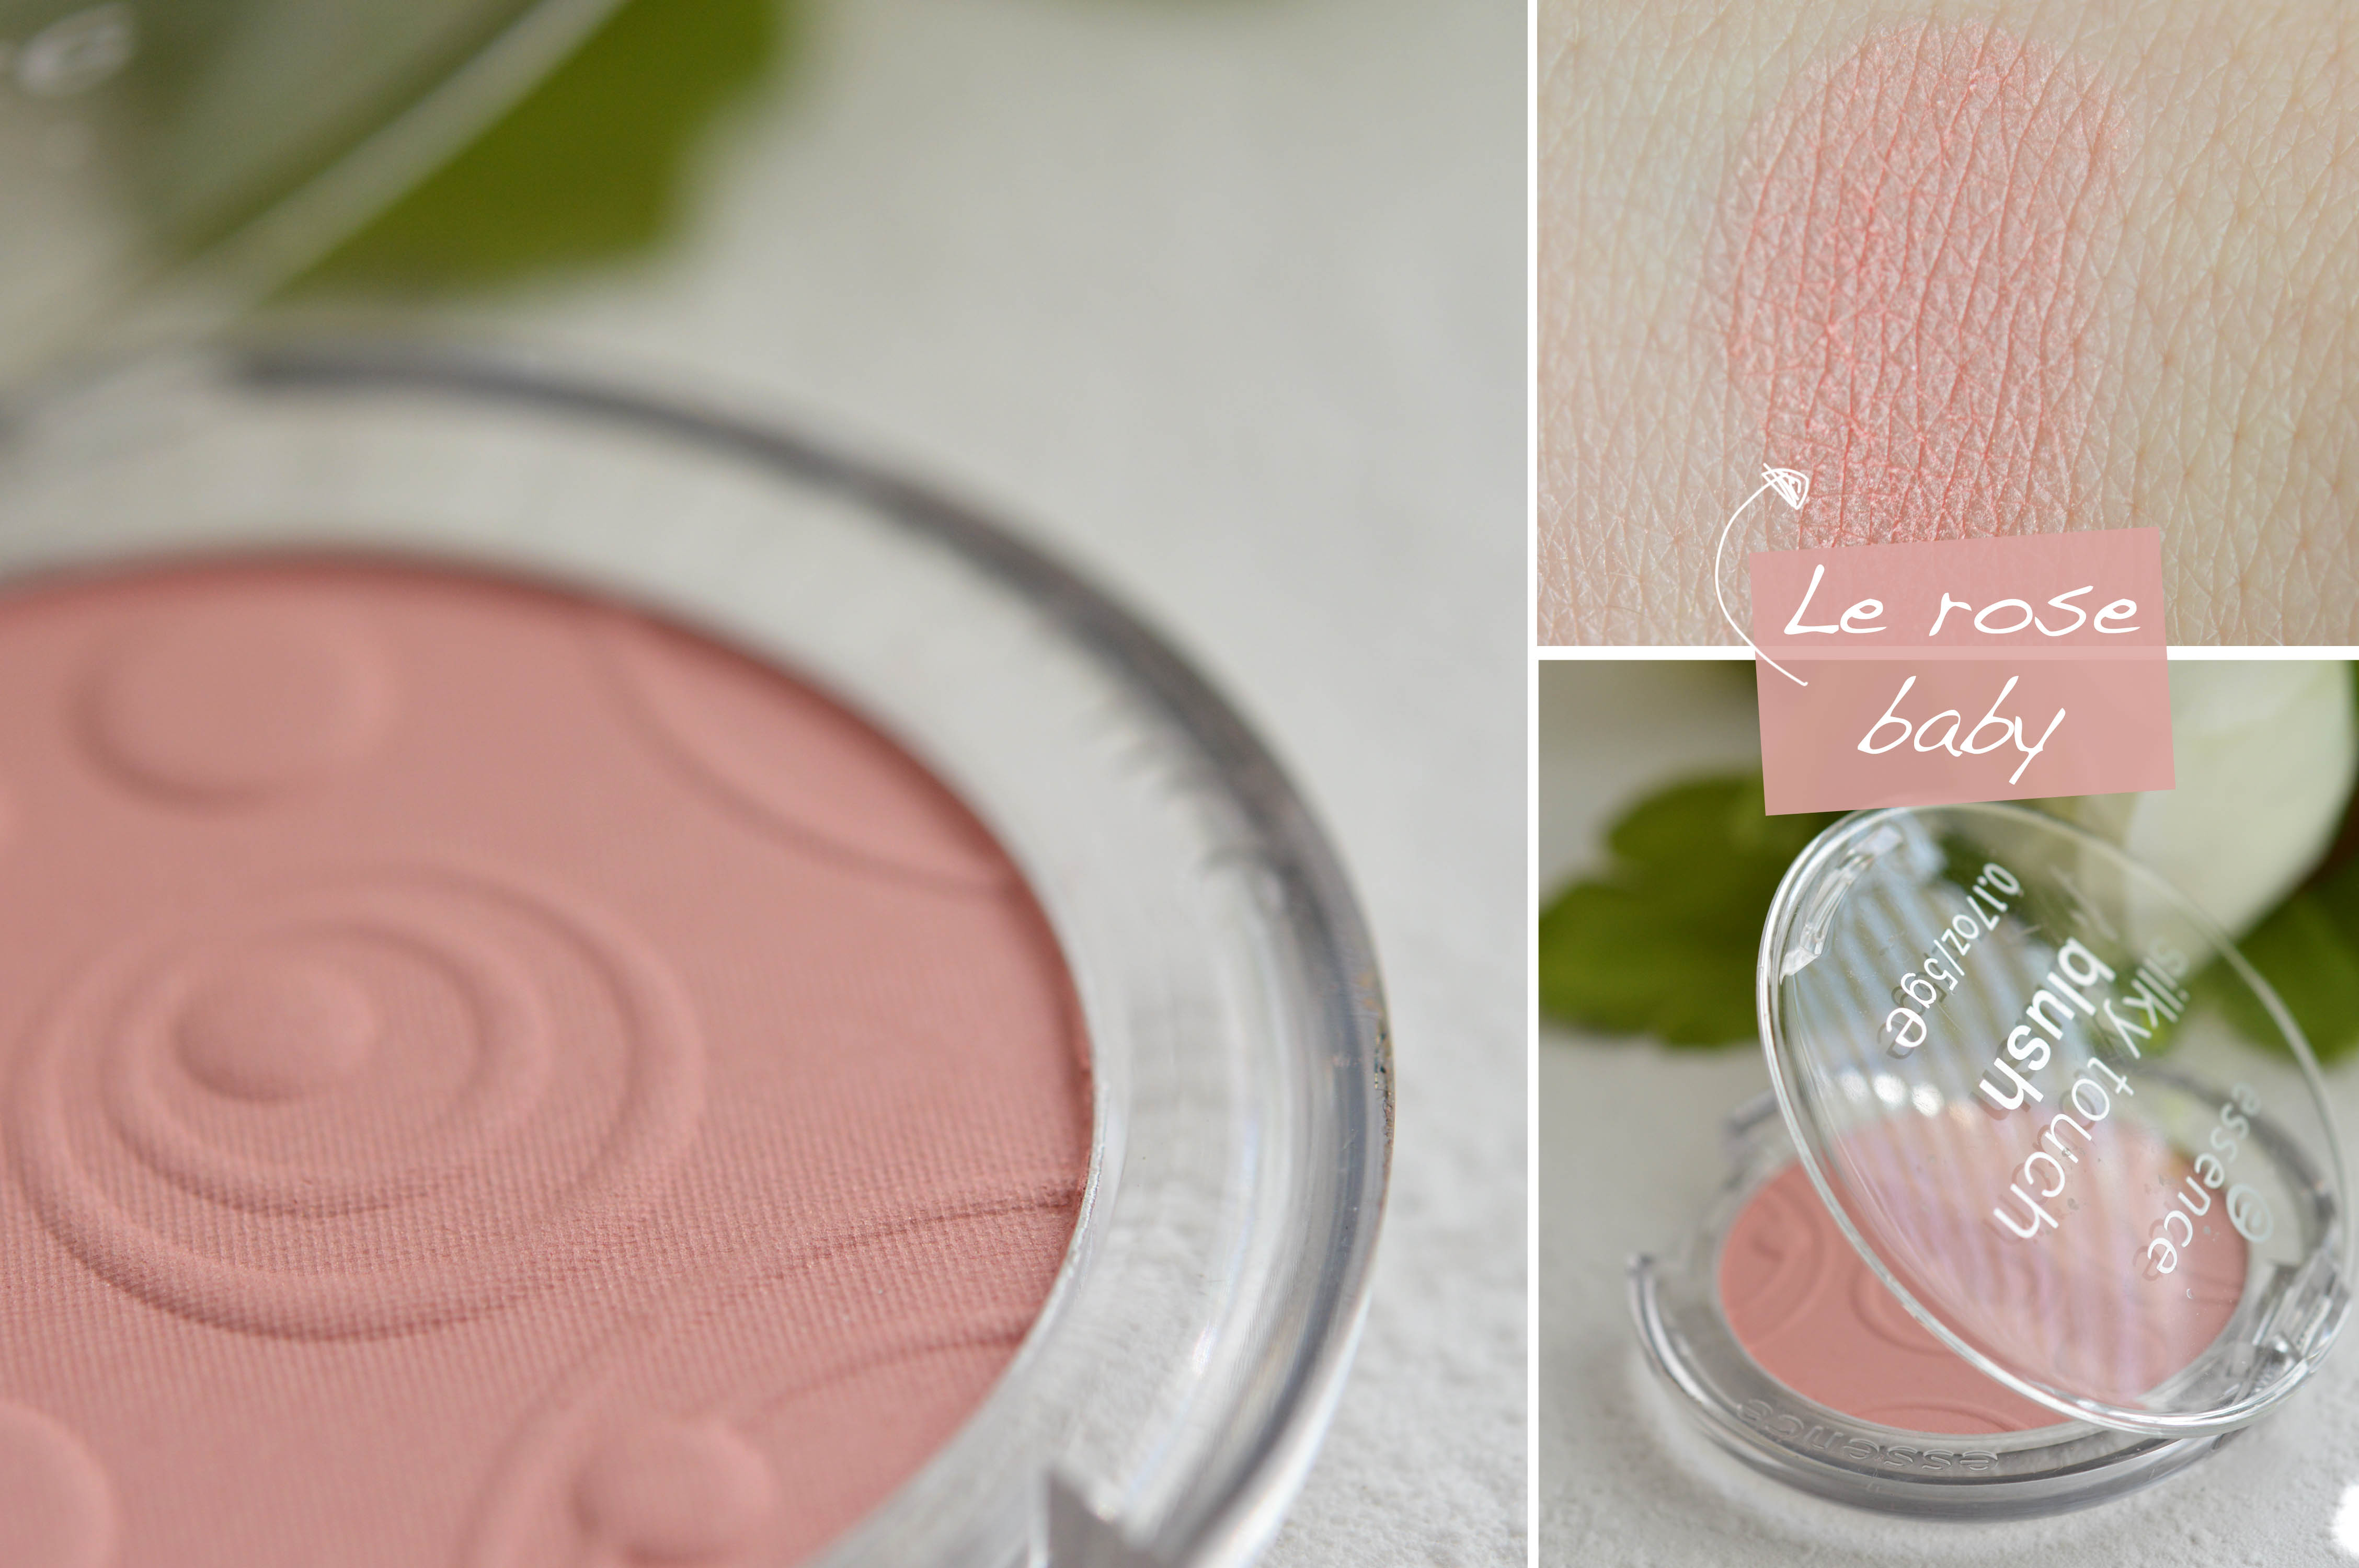 ALITTLEB_BLOG_BEAUTE_ESSENCE_LA_MARQUE_QUIL_FAUT_ENVIER_A_NOS_COPINES_FRONTALIERES_SILKY_TOUCH_BLUSH_10_ADORABLE-swatch